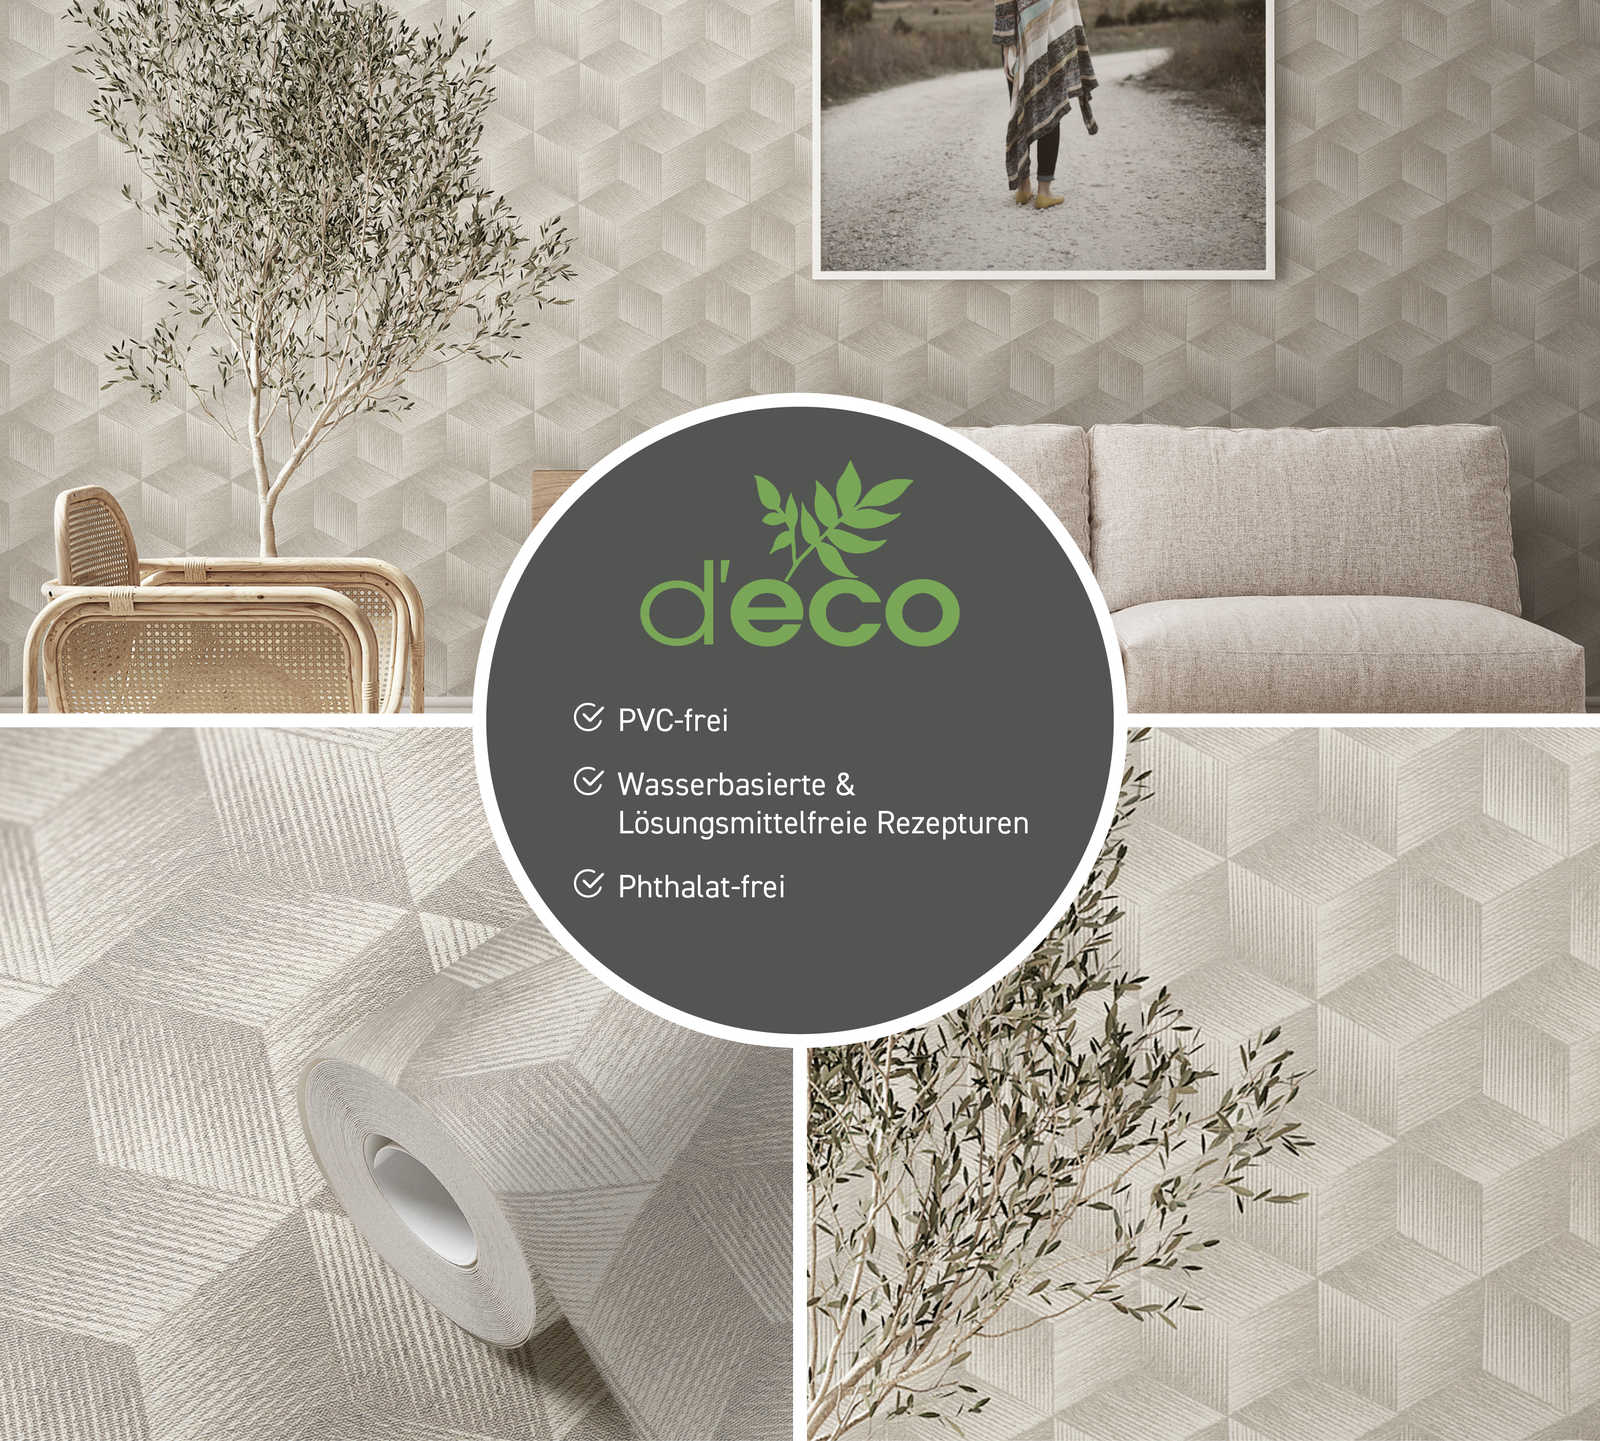             3D-look non-woven wallpaper with square pattern PVC-free - grey, greige, white
        